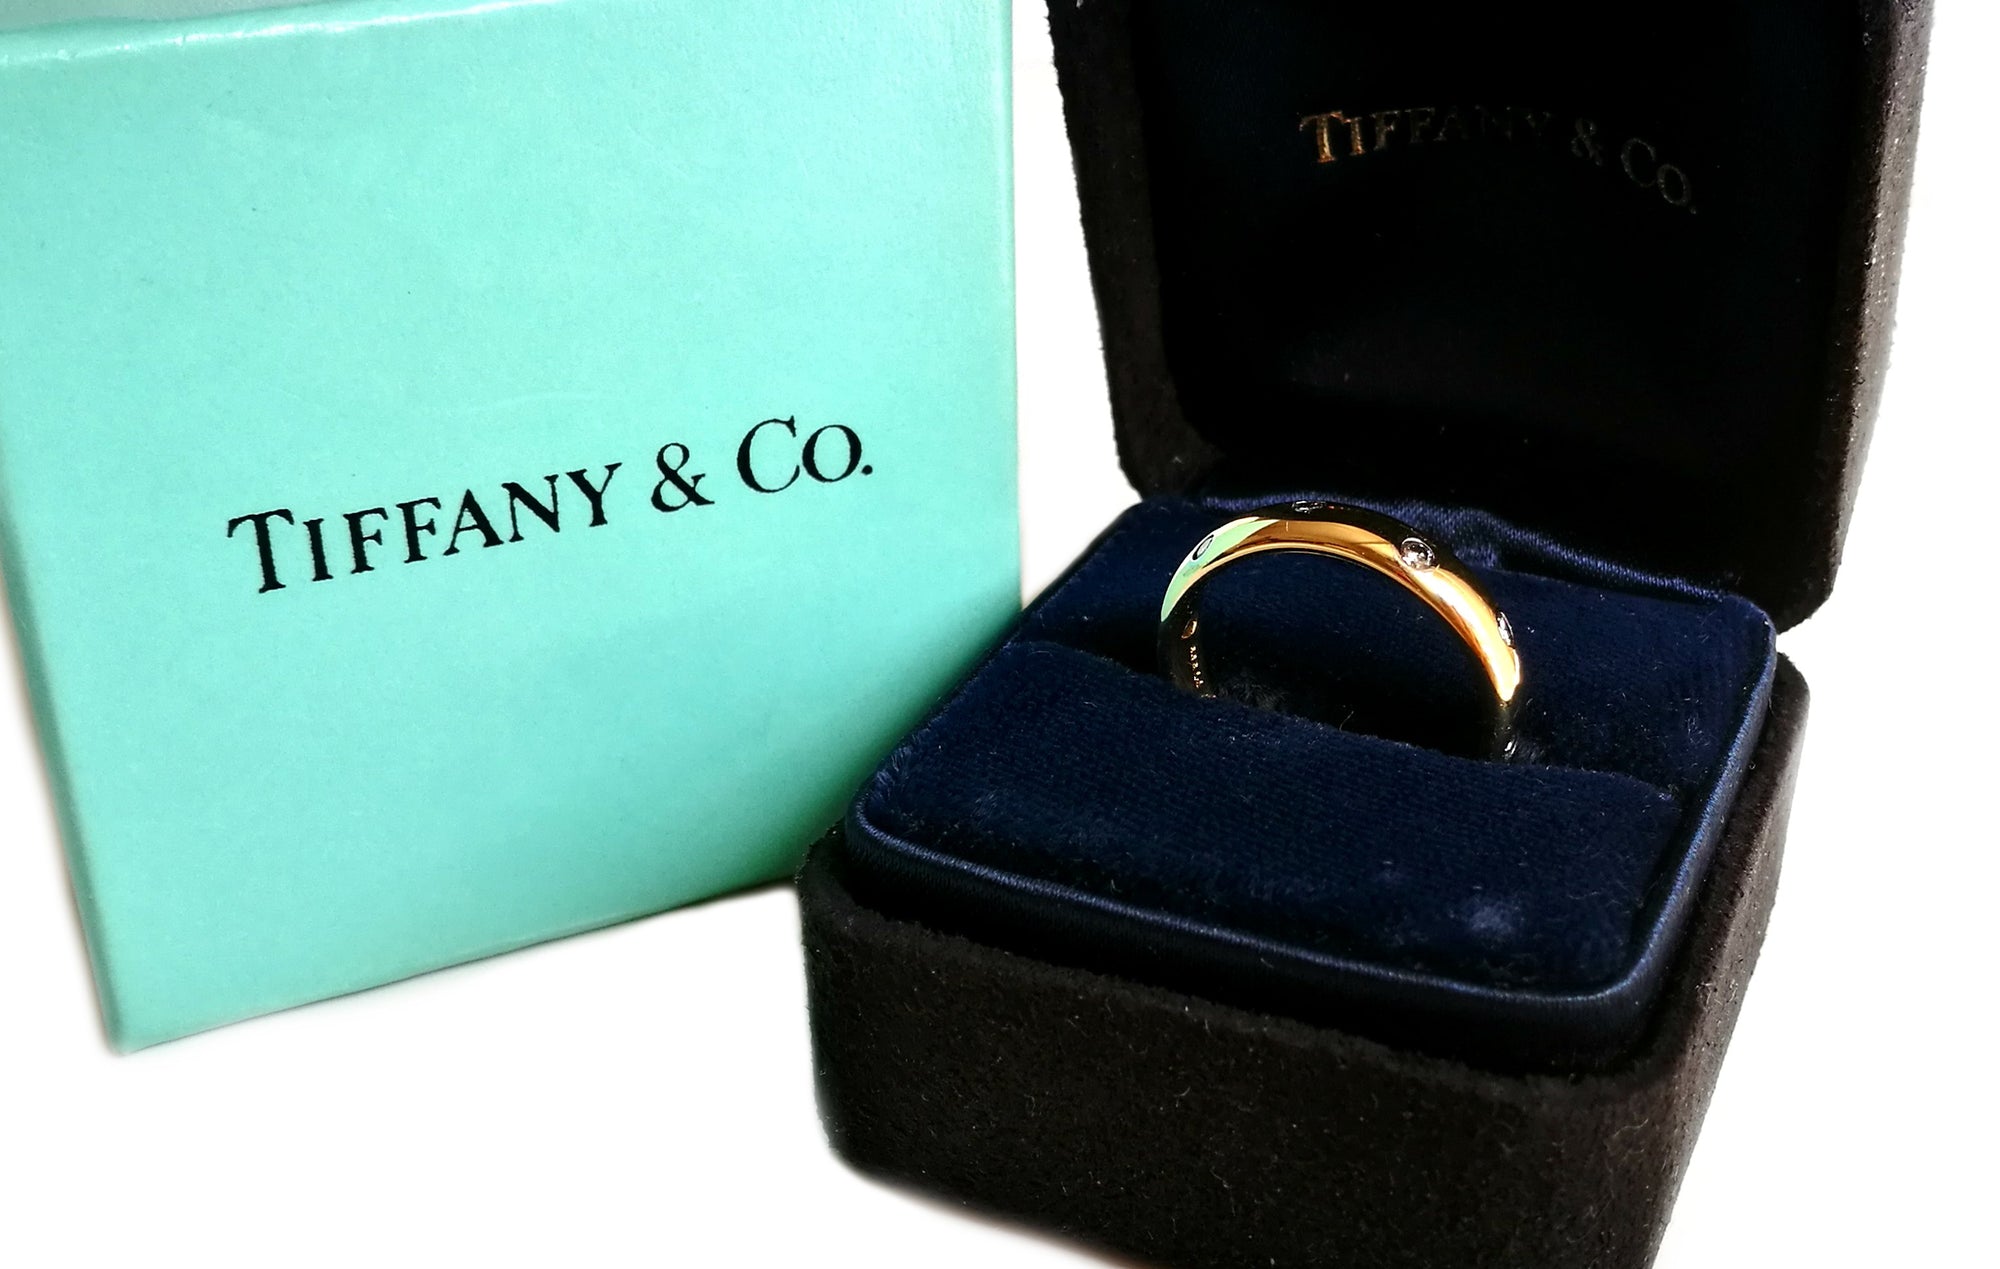 Tiffany & Co. Etoile Yellow Gold Ring, Size N 1/2